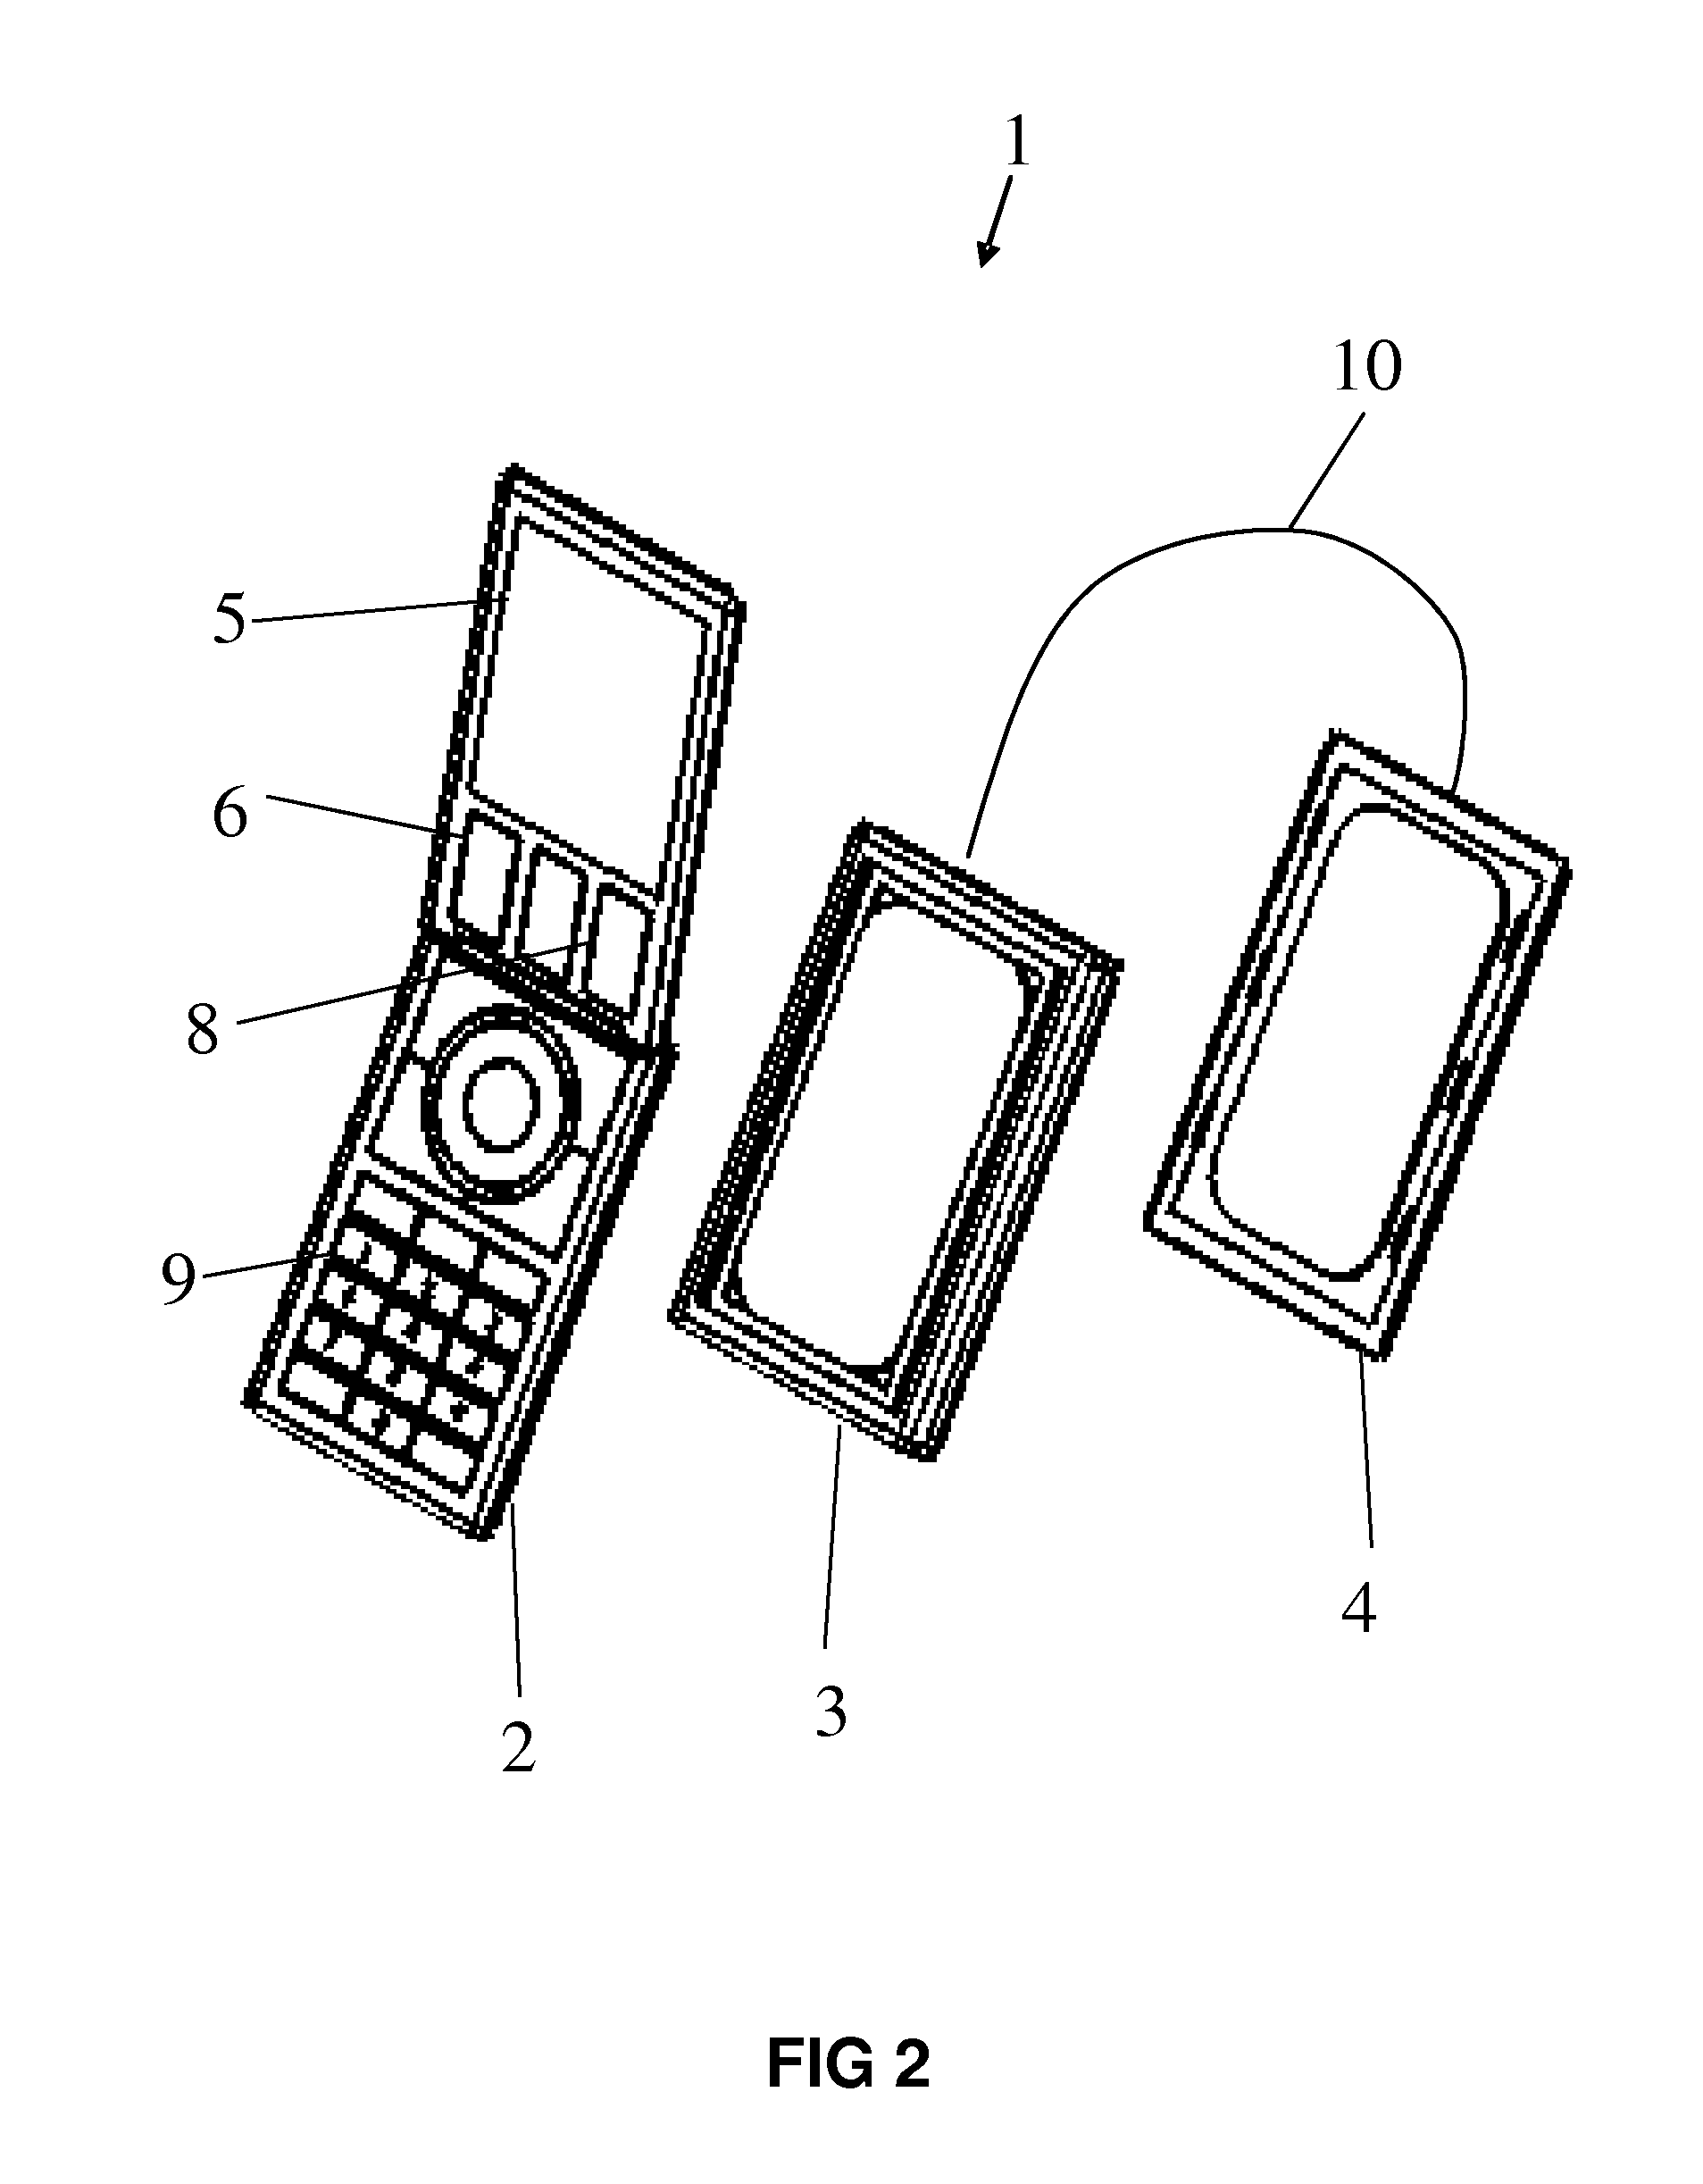 Method and apparatus of remotely-operated automated external defribrallator incorporated into a handheld device